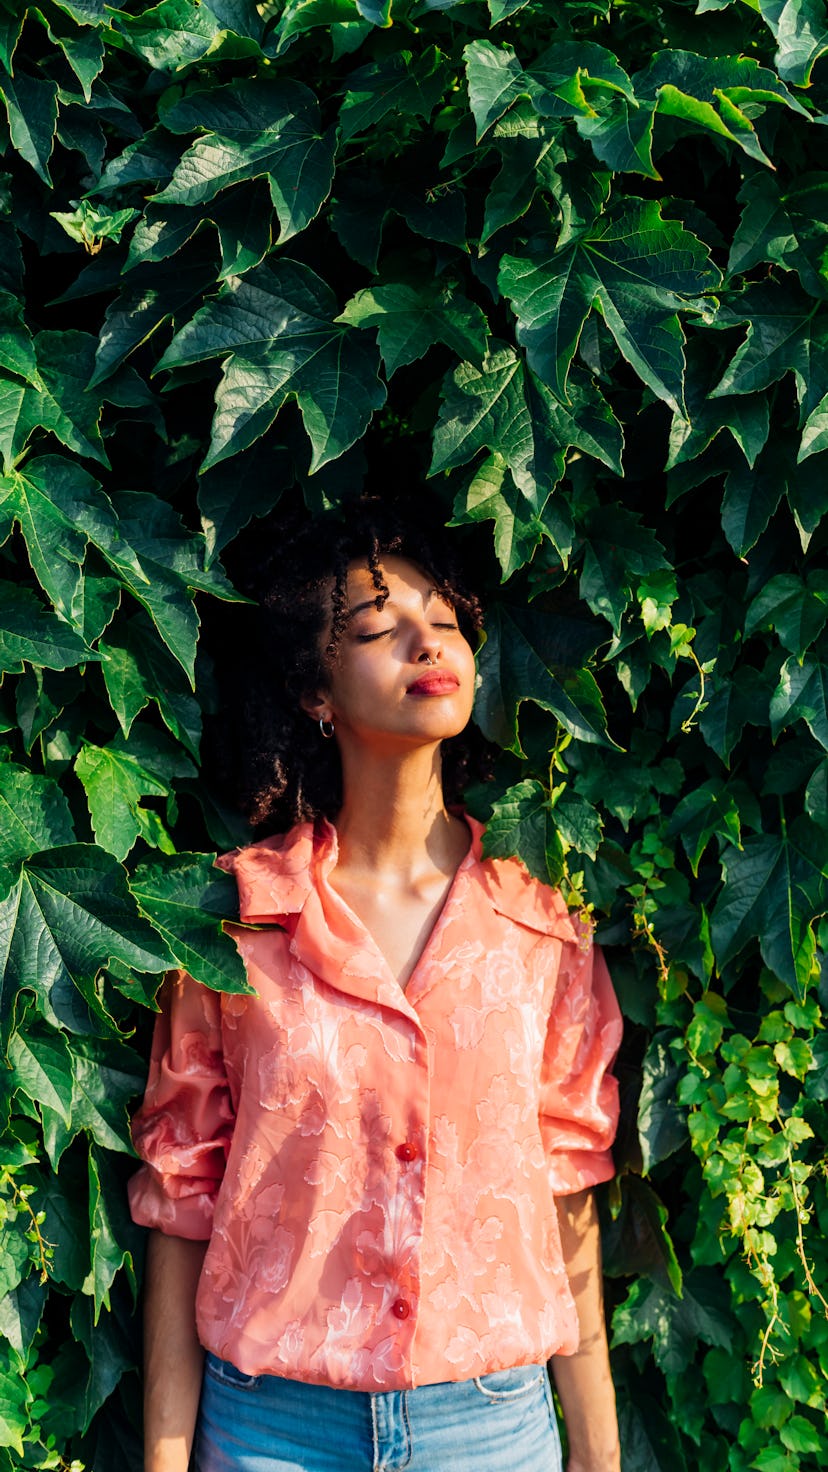 Young woman closing her eyes in front of a plant backdrop. Uranus retrograde arrives on Aug. 24 in h...